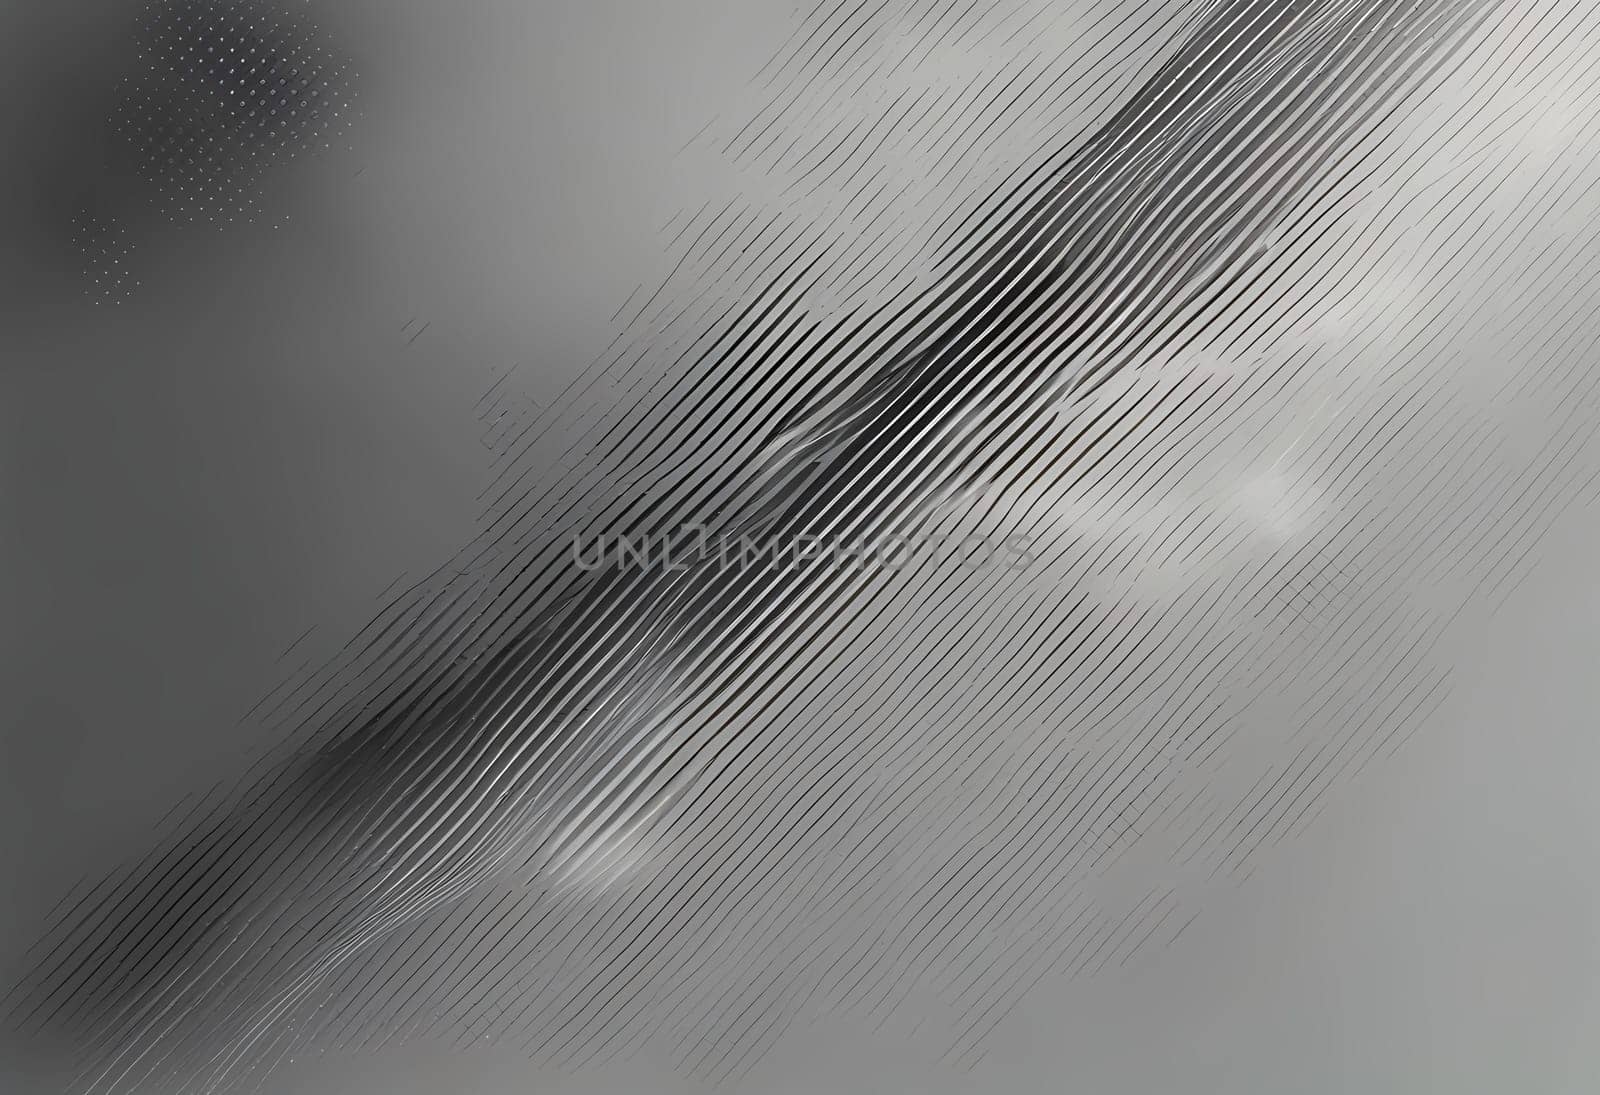 Abstract light gray and dark gray background with diagonal lines in one direction and halftone grid points by rostik924